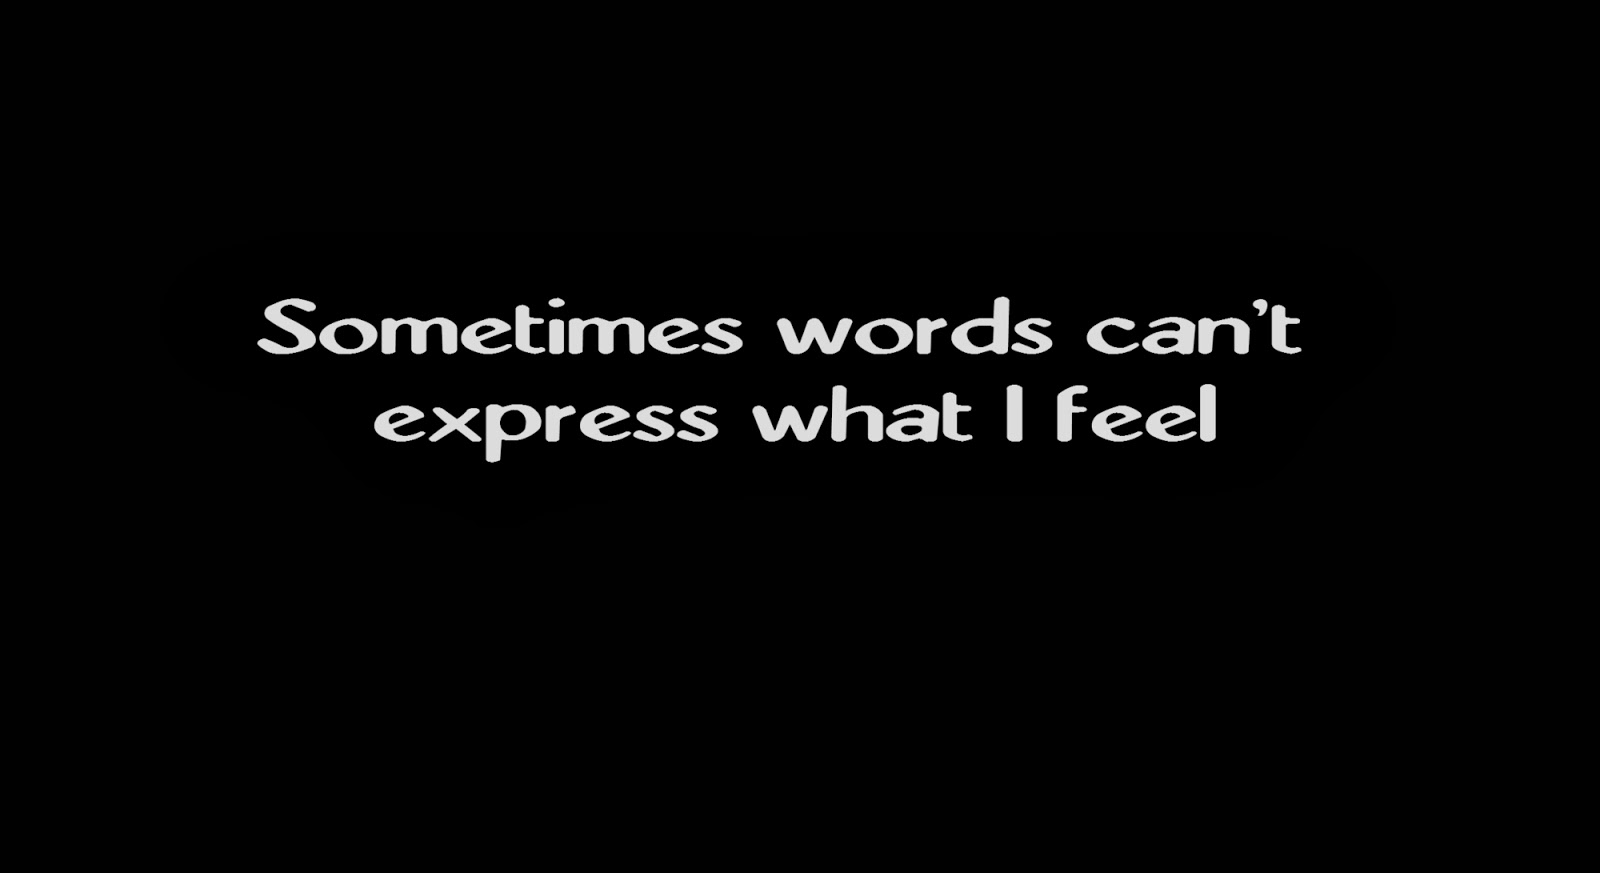 Sometimes words can't express what I feel